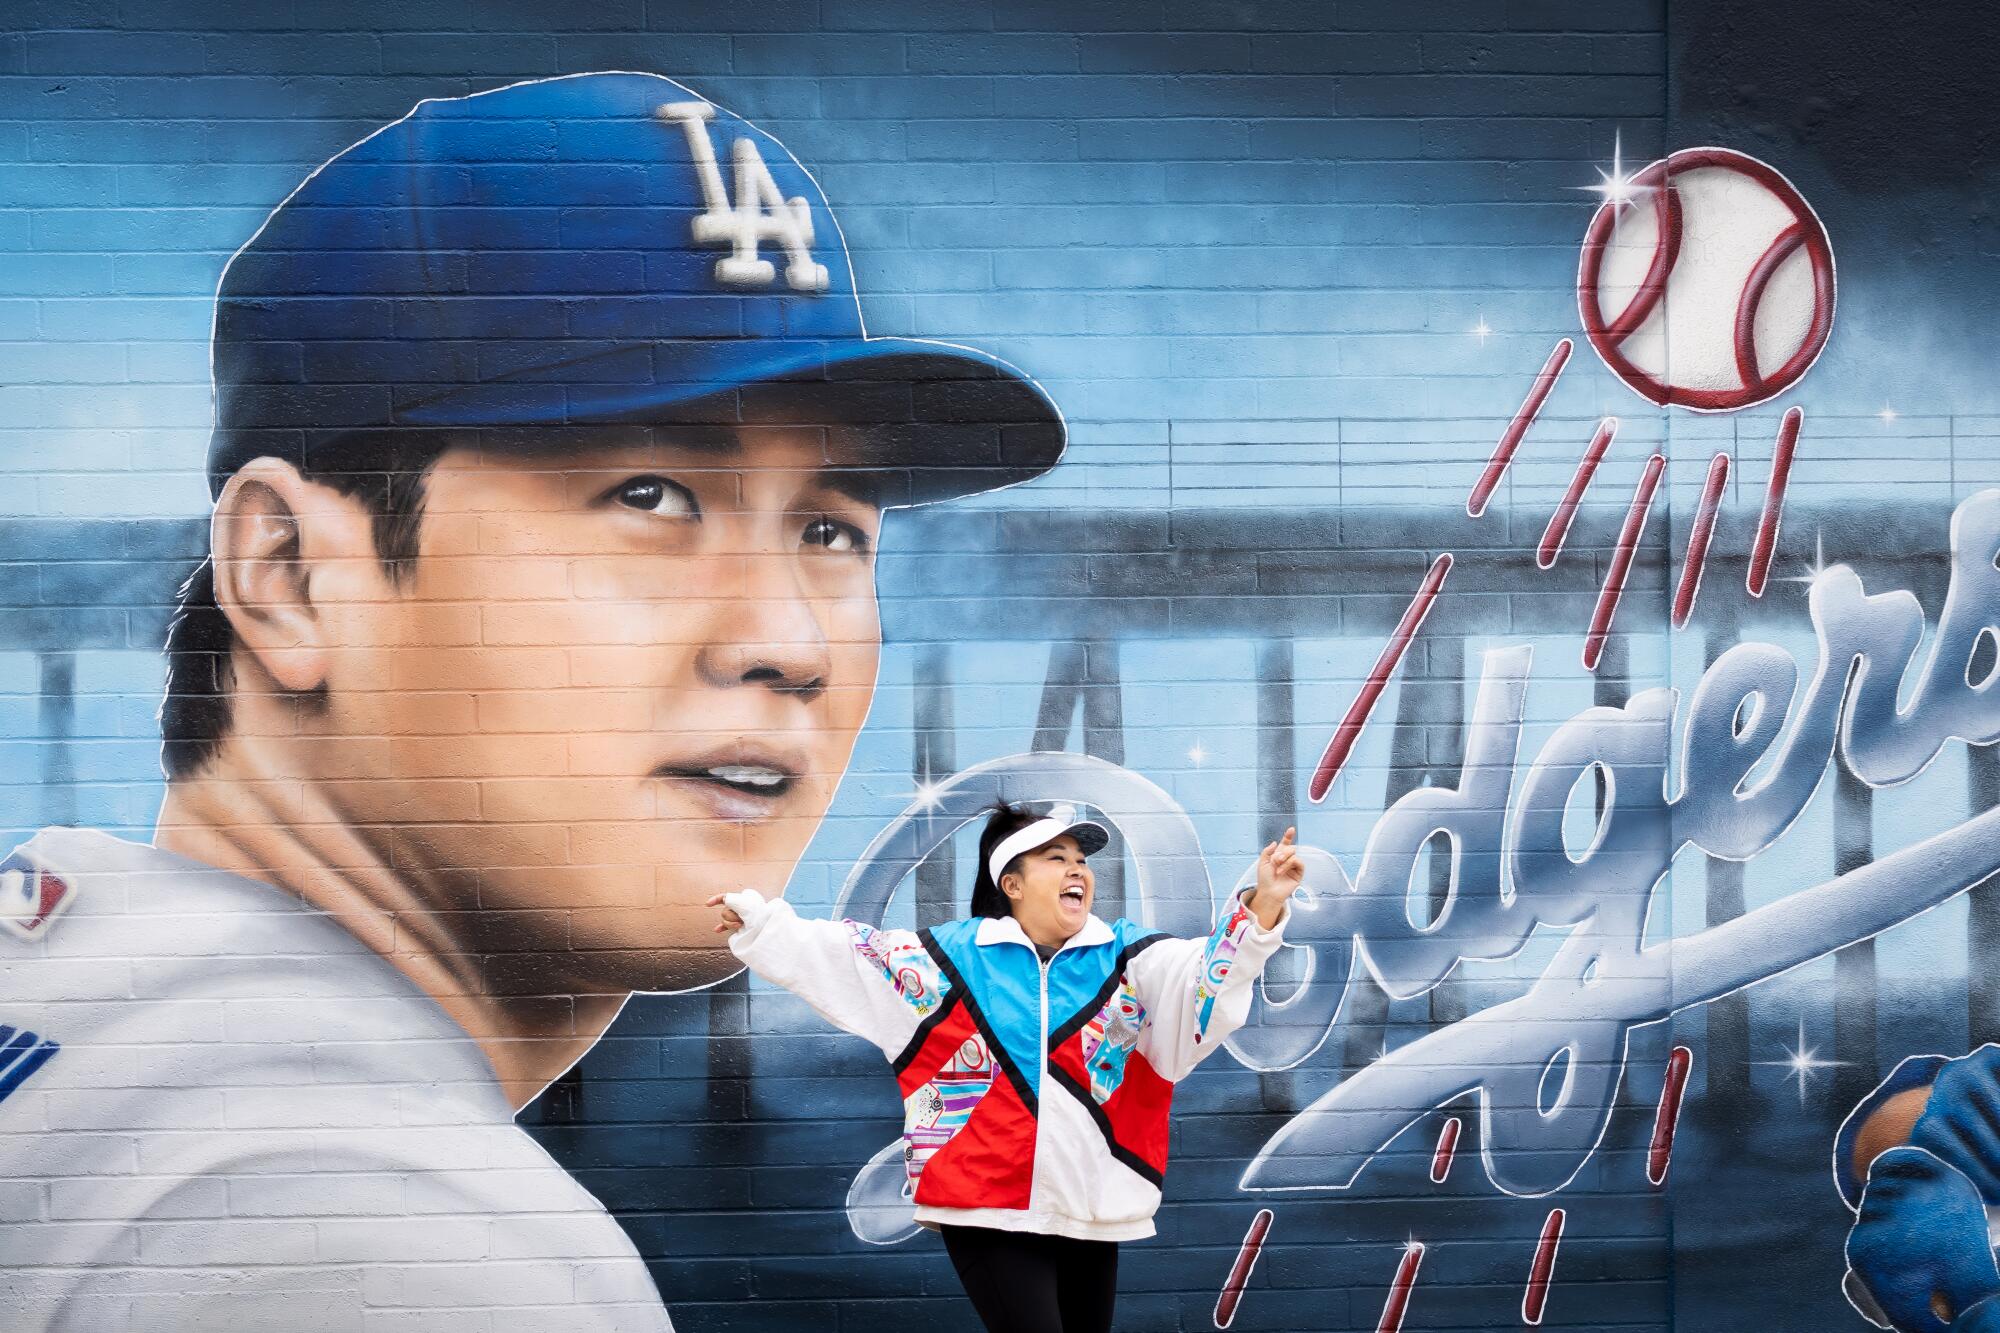 A smiling person dances in front of a mural showing Shohei Ohtani as a Dodger.